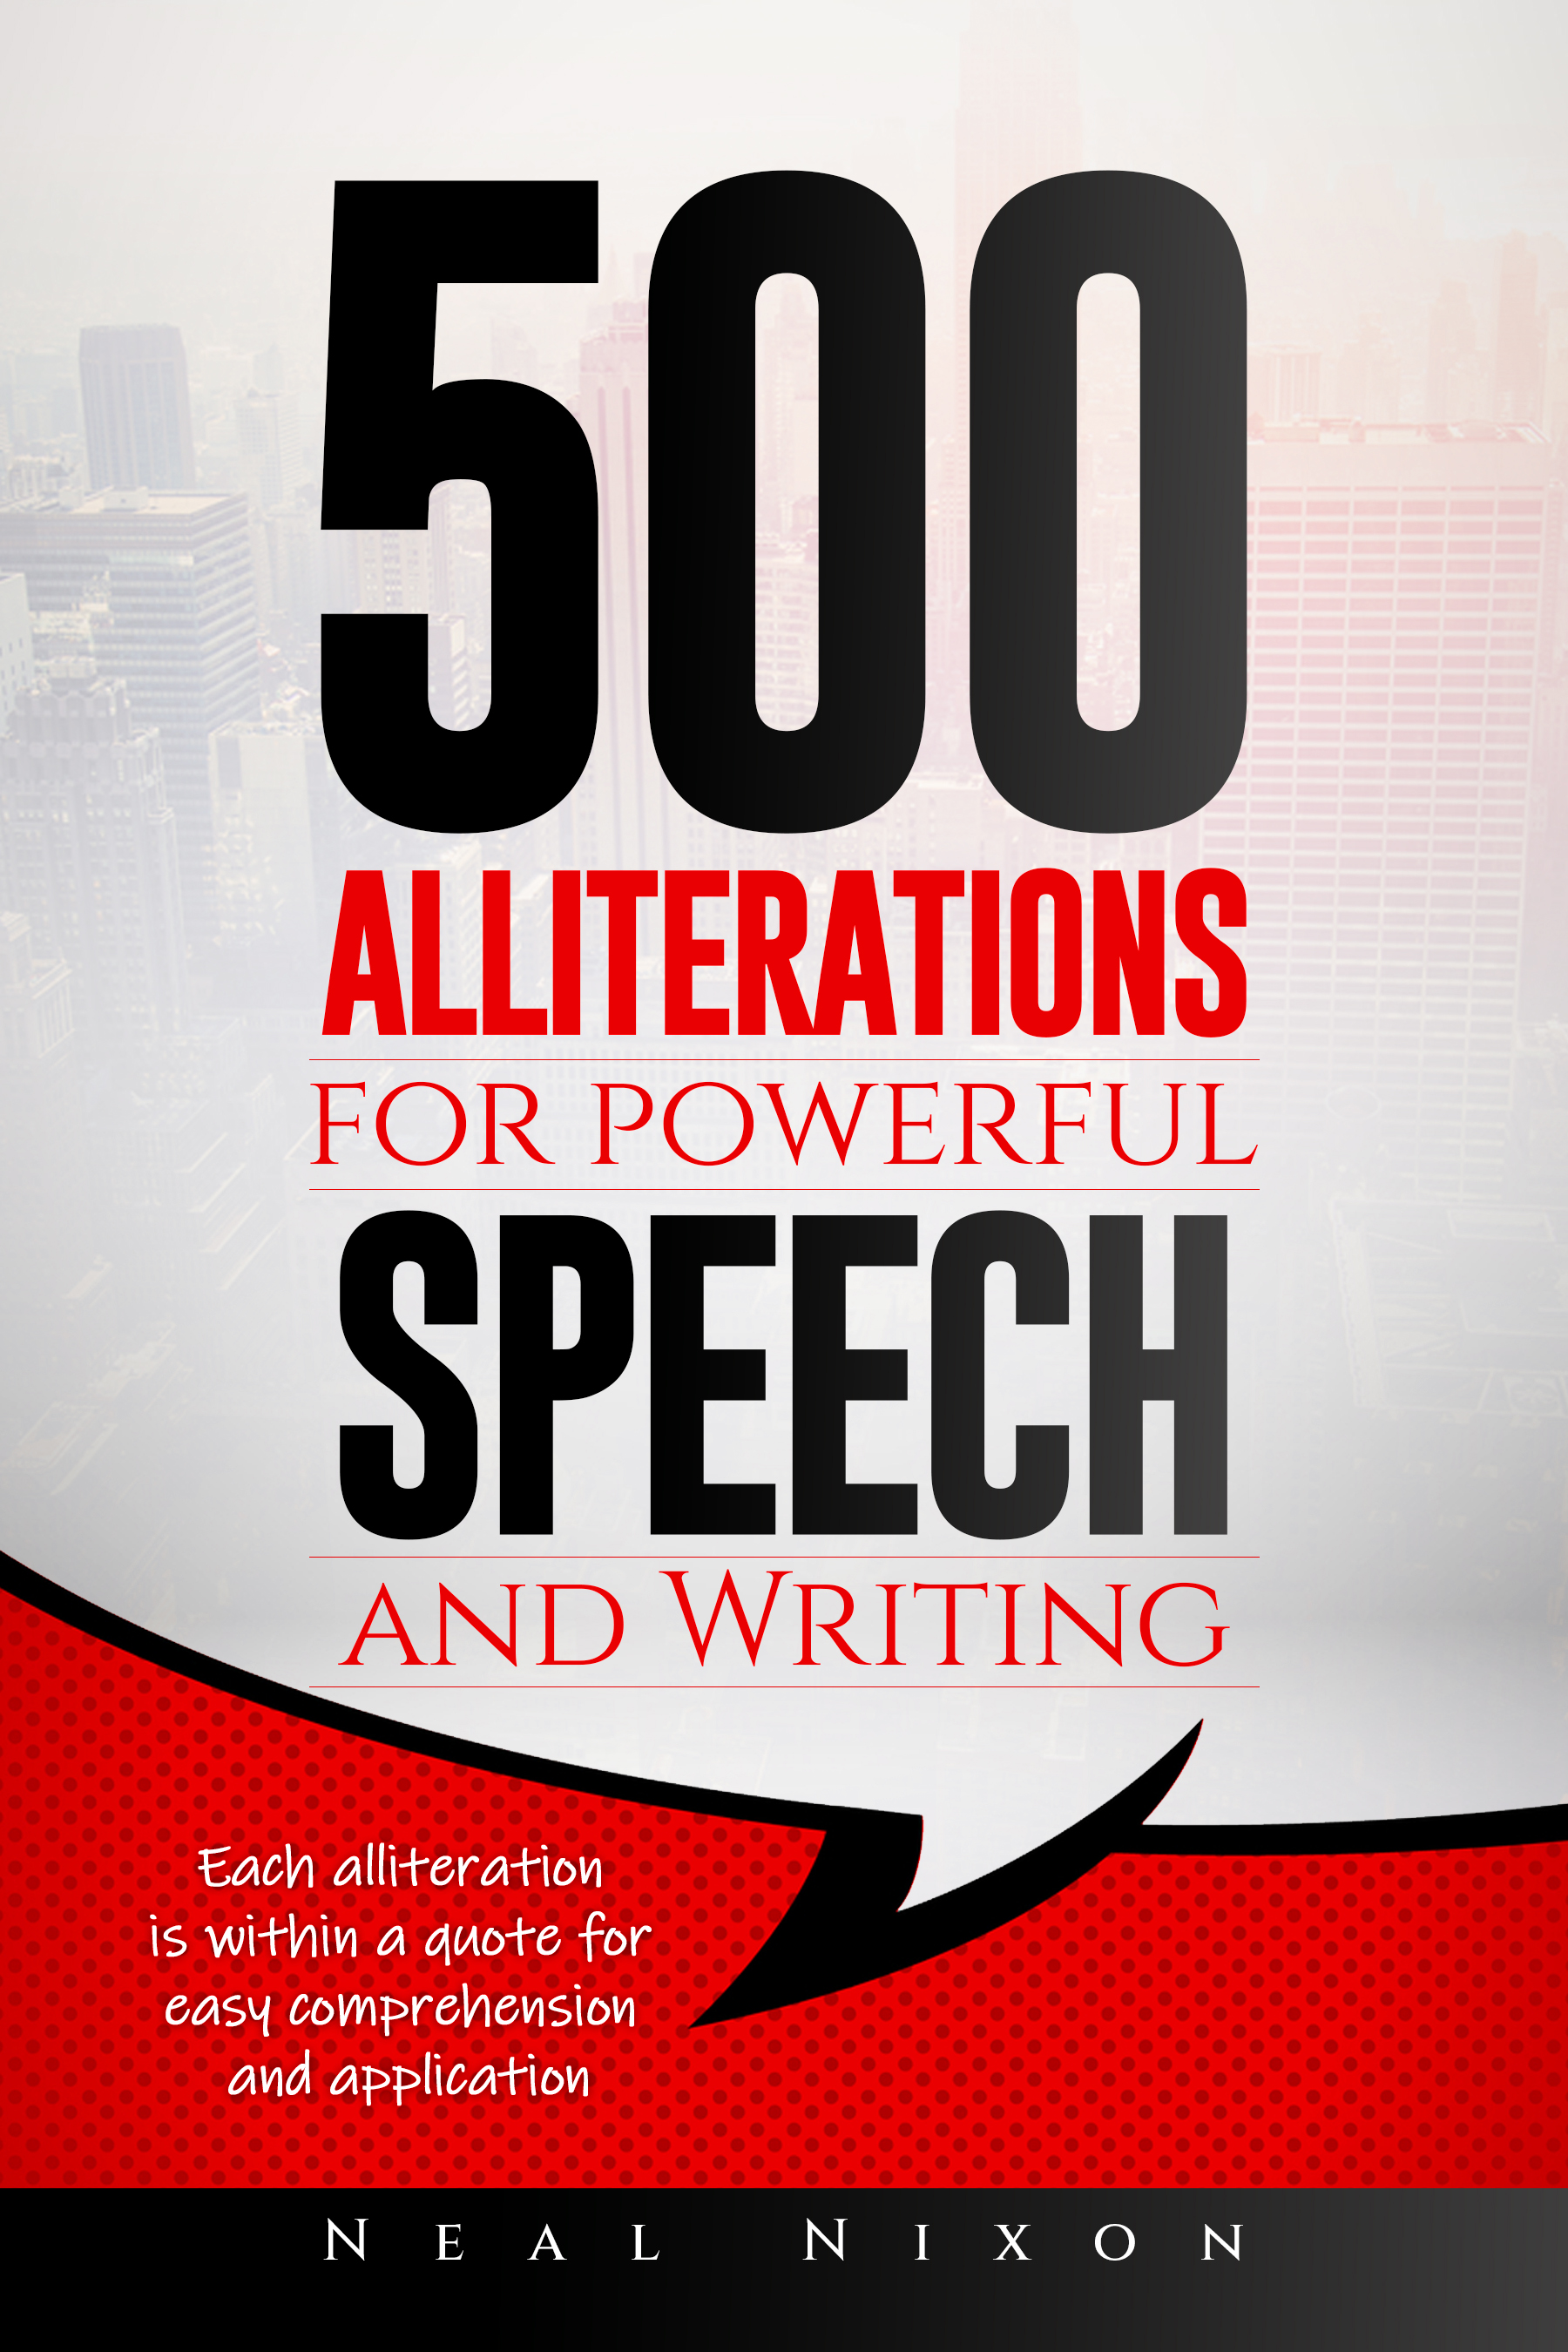 500 Alliterations for powerful speech and writing